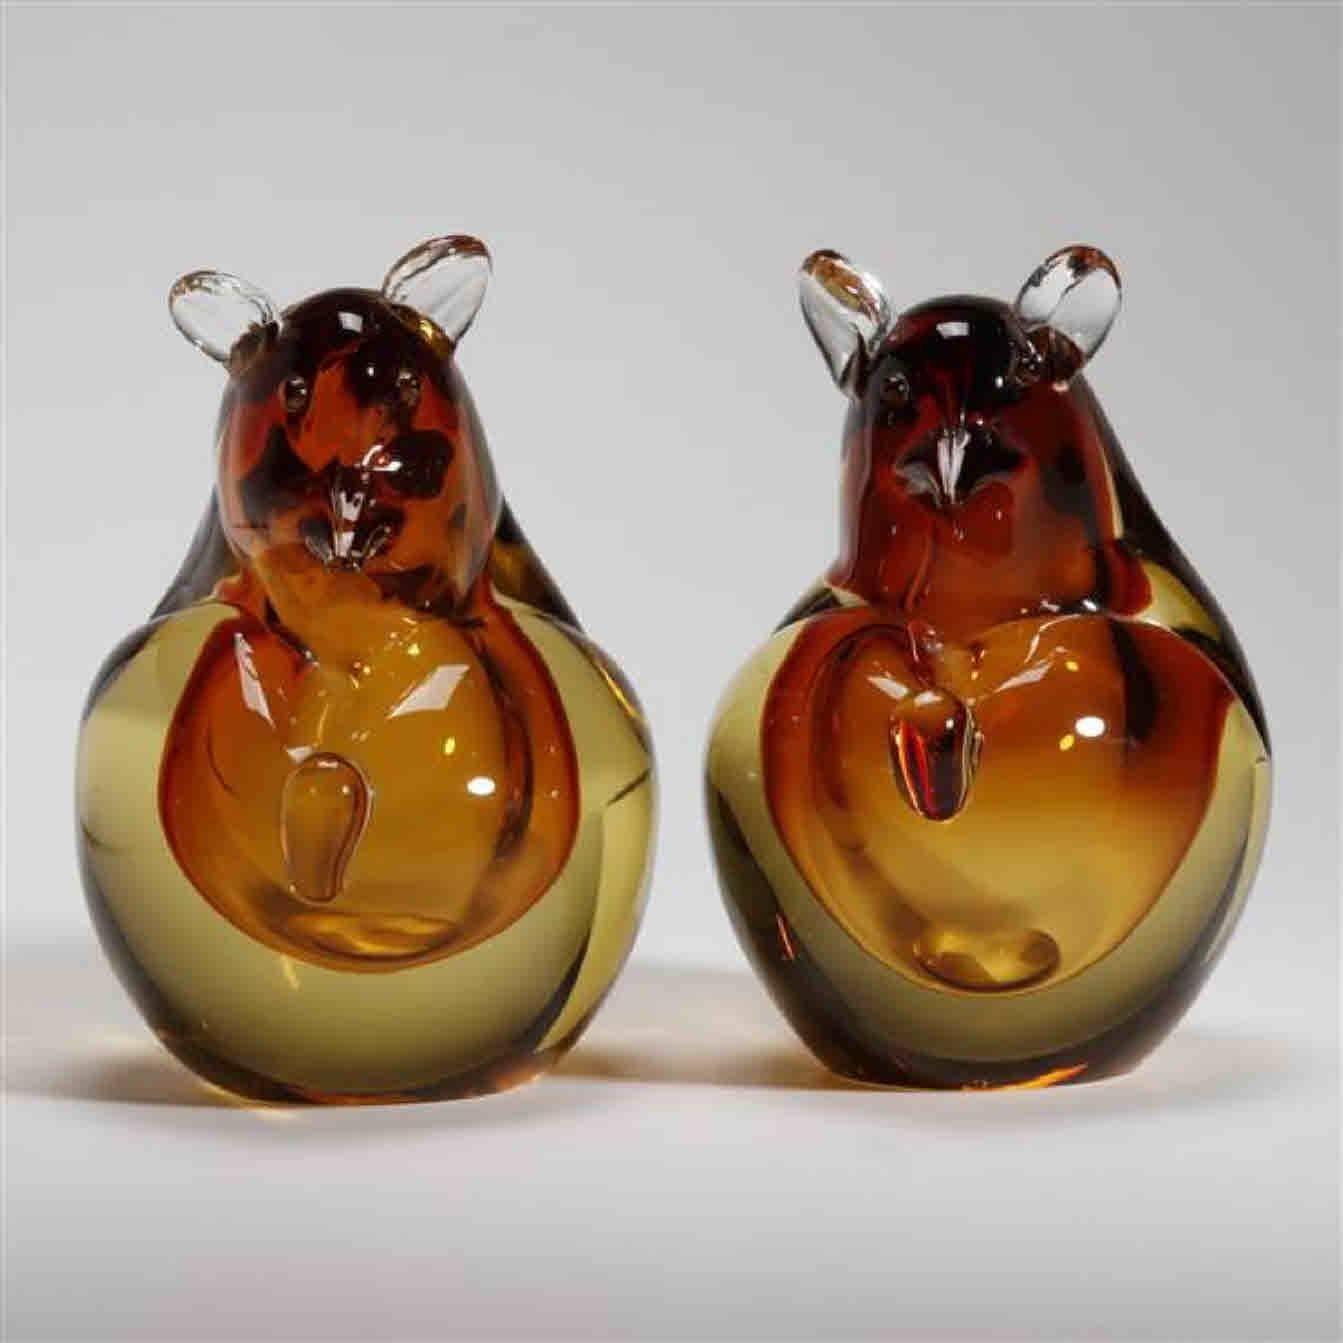 Pair of 1950s bear bookends by Alfredo Barbini. Distributed by Alvin and retain original Alvin labels.